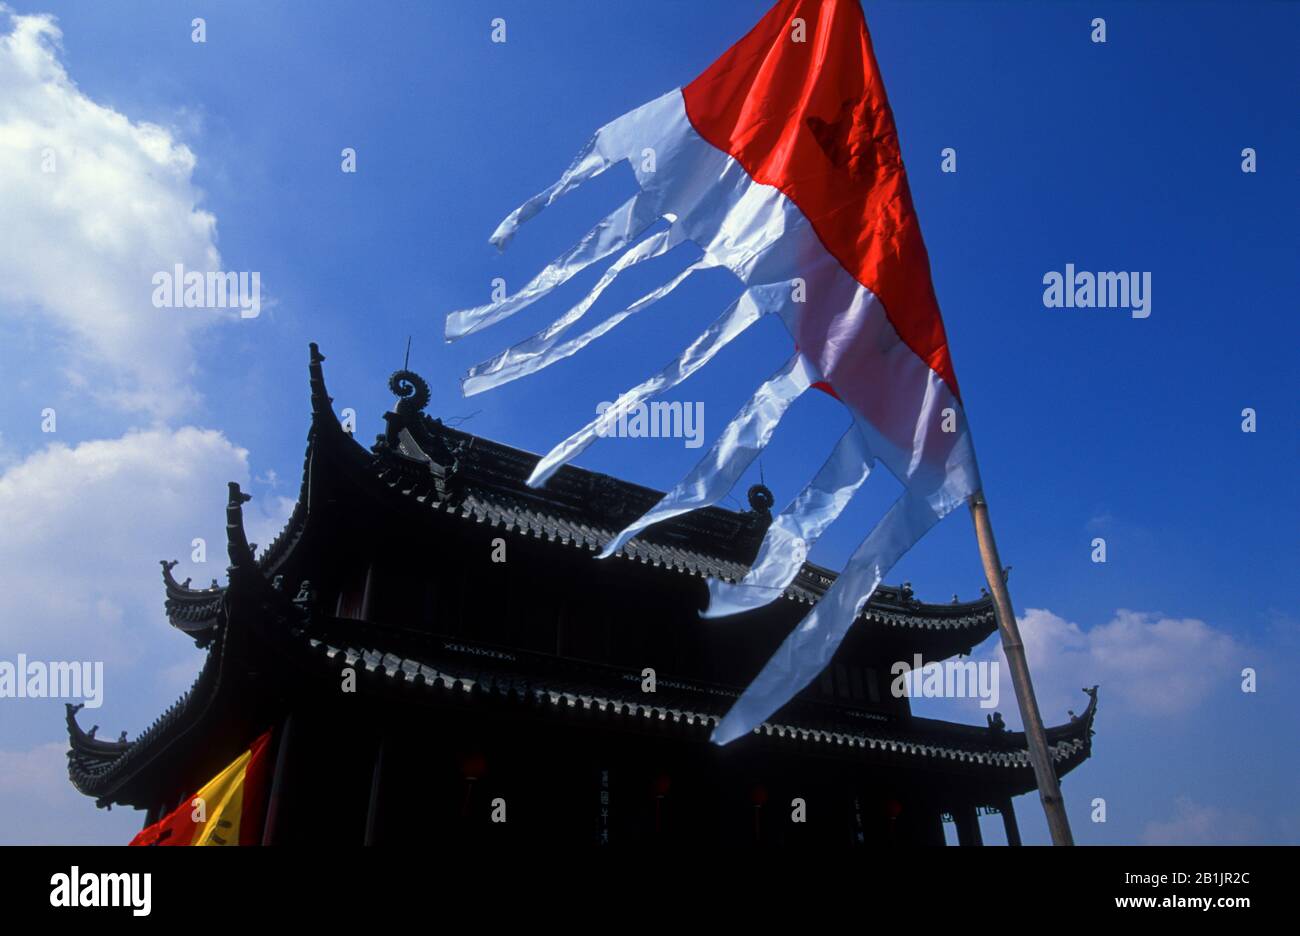 Suzhou China. Panmen Gate, silhouetted against a blue sky, traditional flag in foreground. Stock Photo